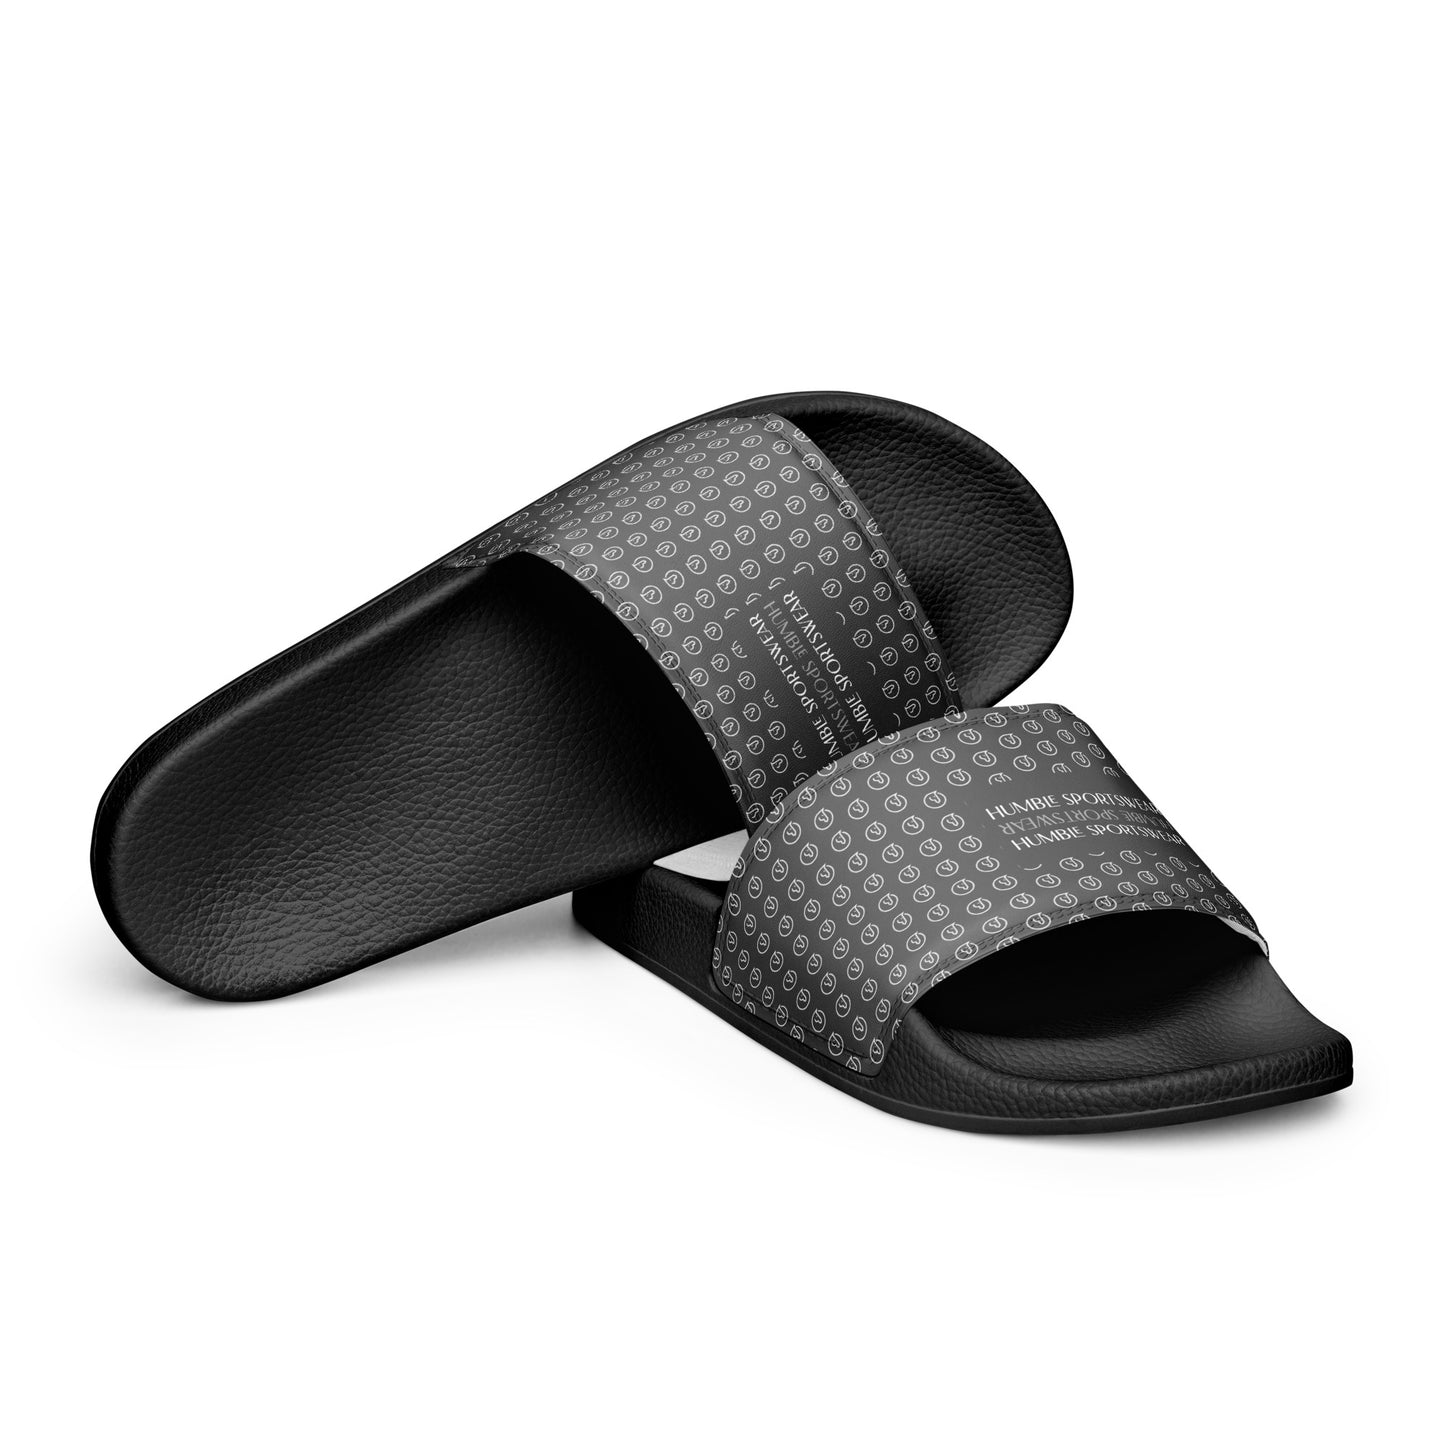 Humble sportswear, women's color match casual grey slides sandals